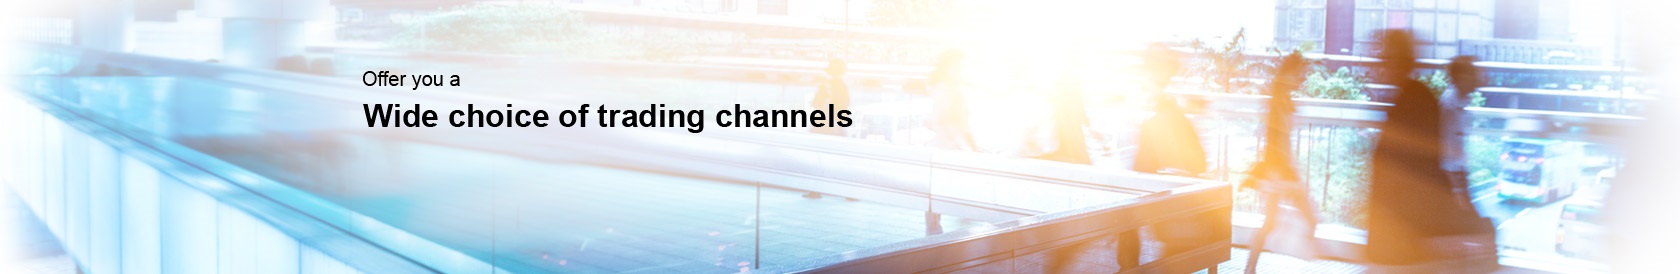 Offer a wide choice of trading channels